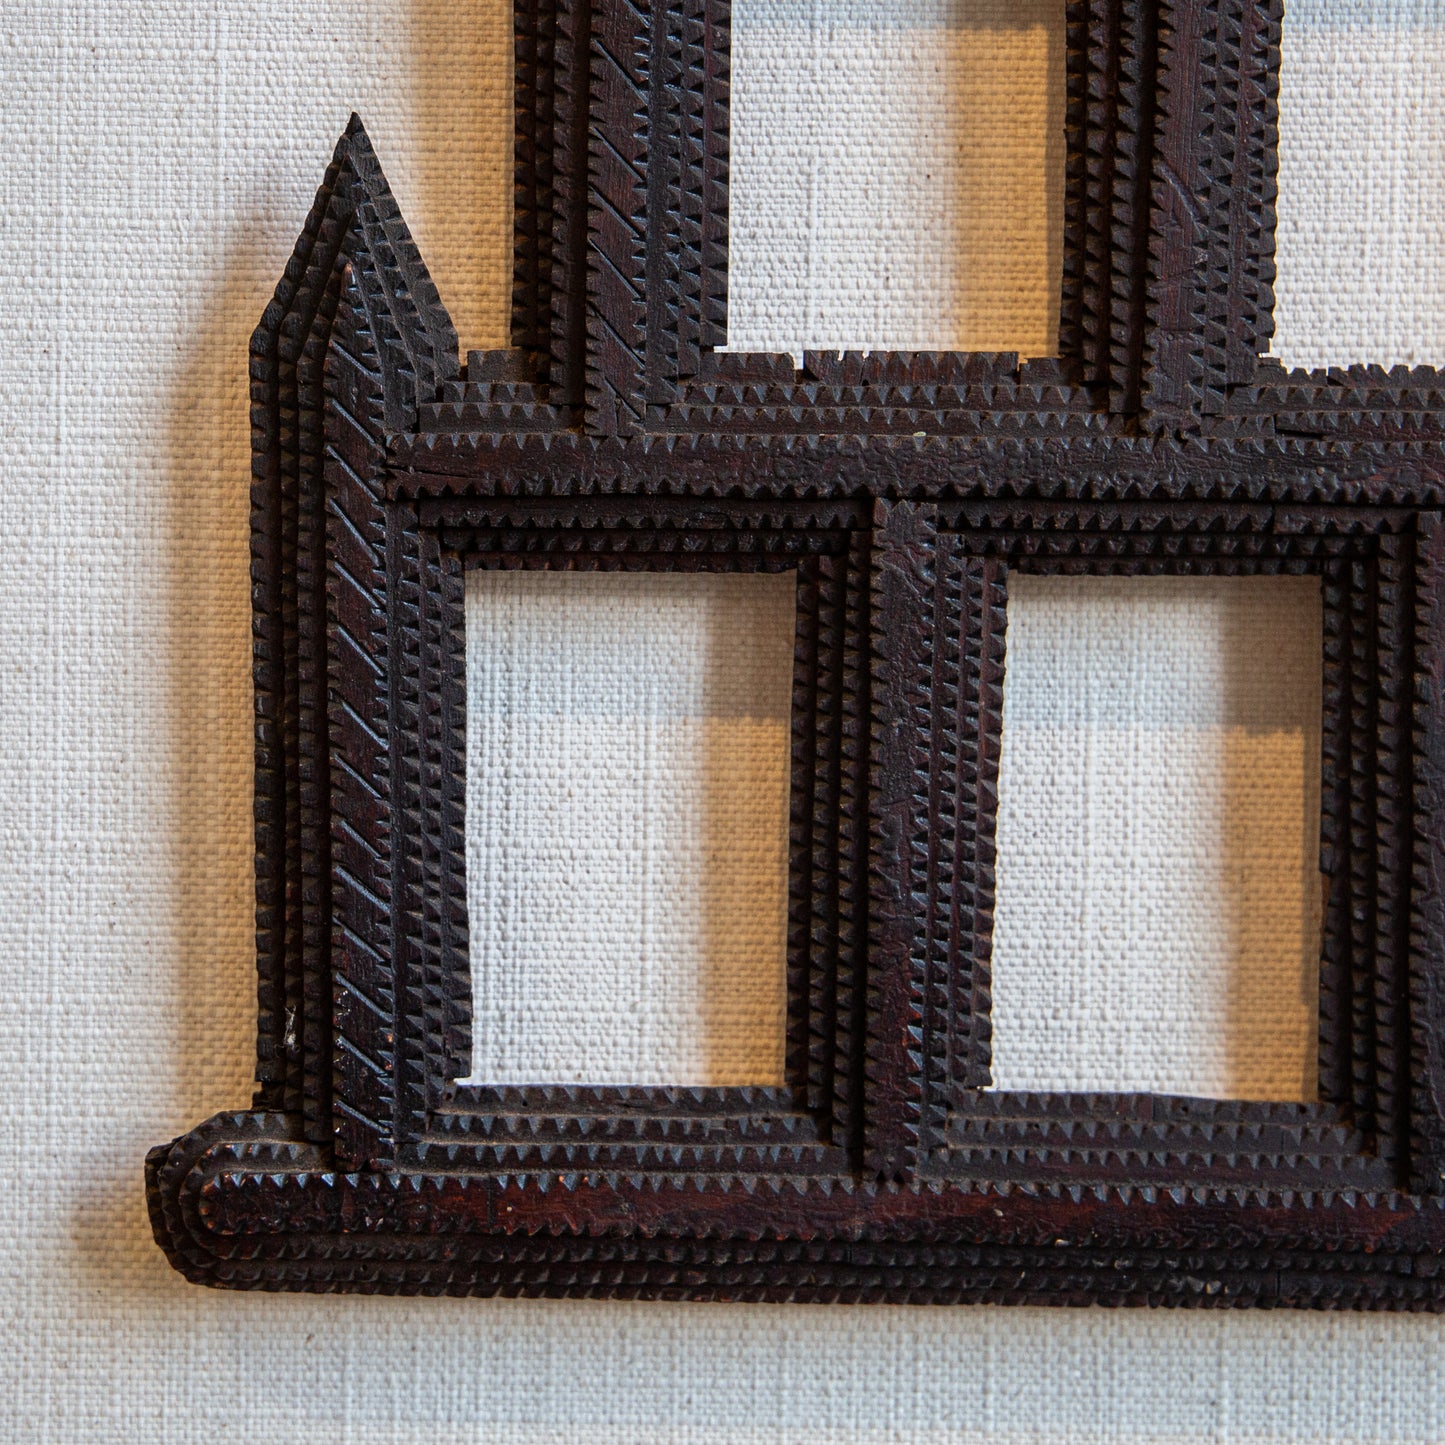 A CHIP CARVED PYRAMID SHAPED FRAME